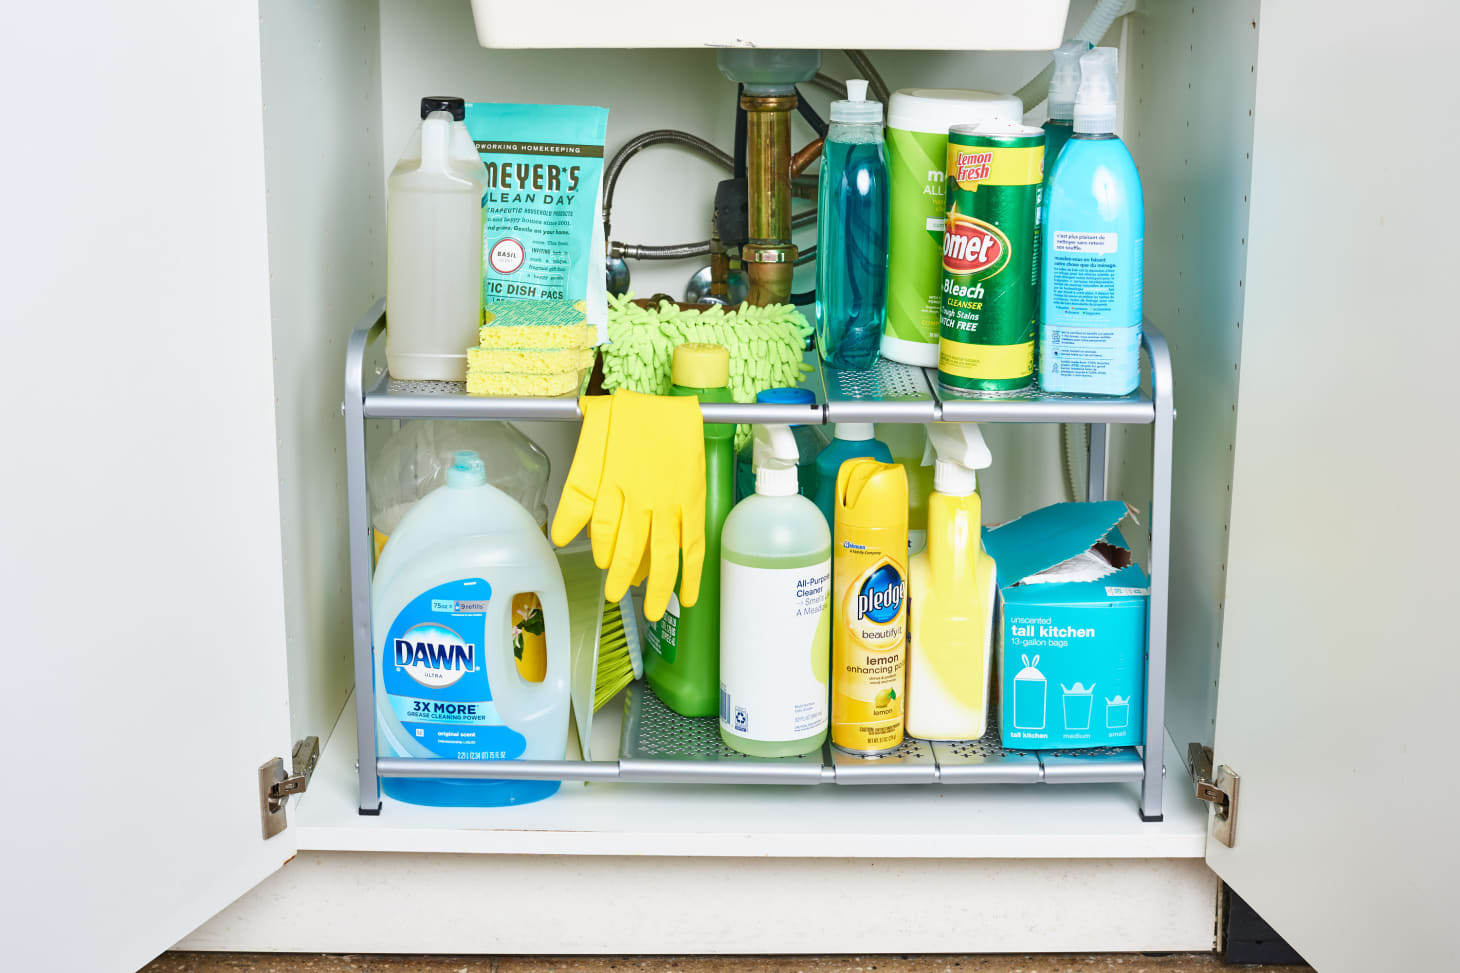  An organized shelf of cleaning supplies in a kitchen, including dish soap, gloves, and all-purpose cleaner.